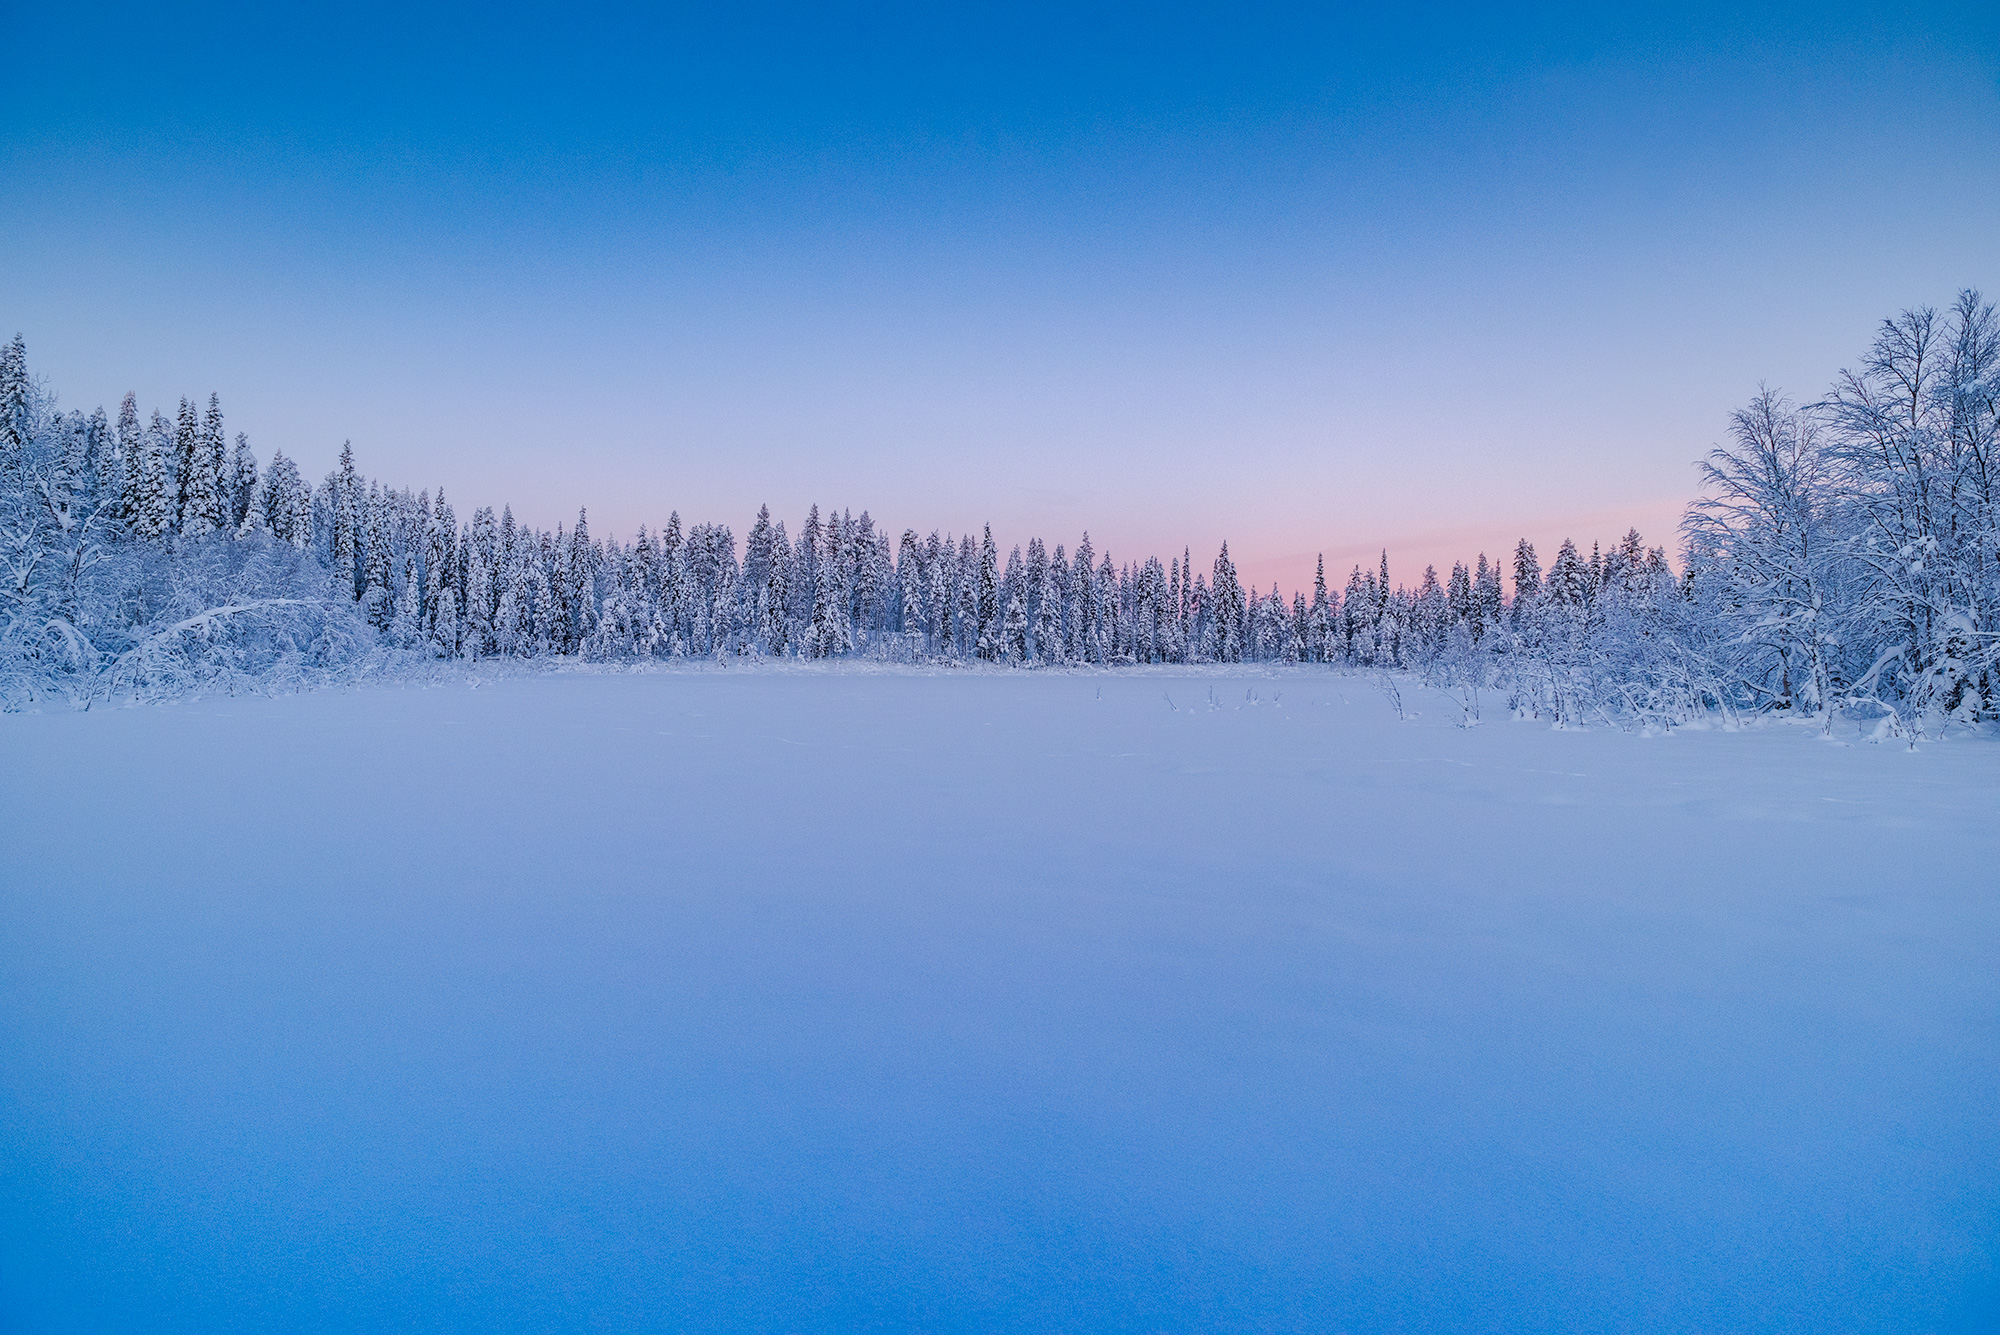 Snow-covered Lapland forest at sunset, photograph by Jennifer Esseiva.